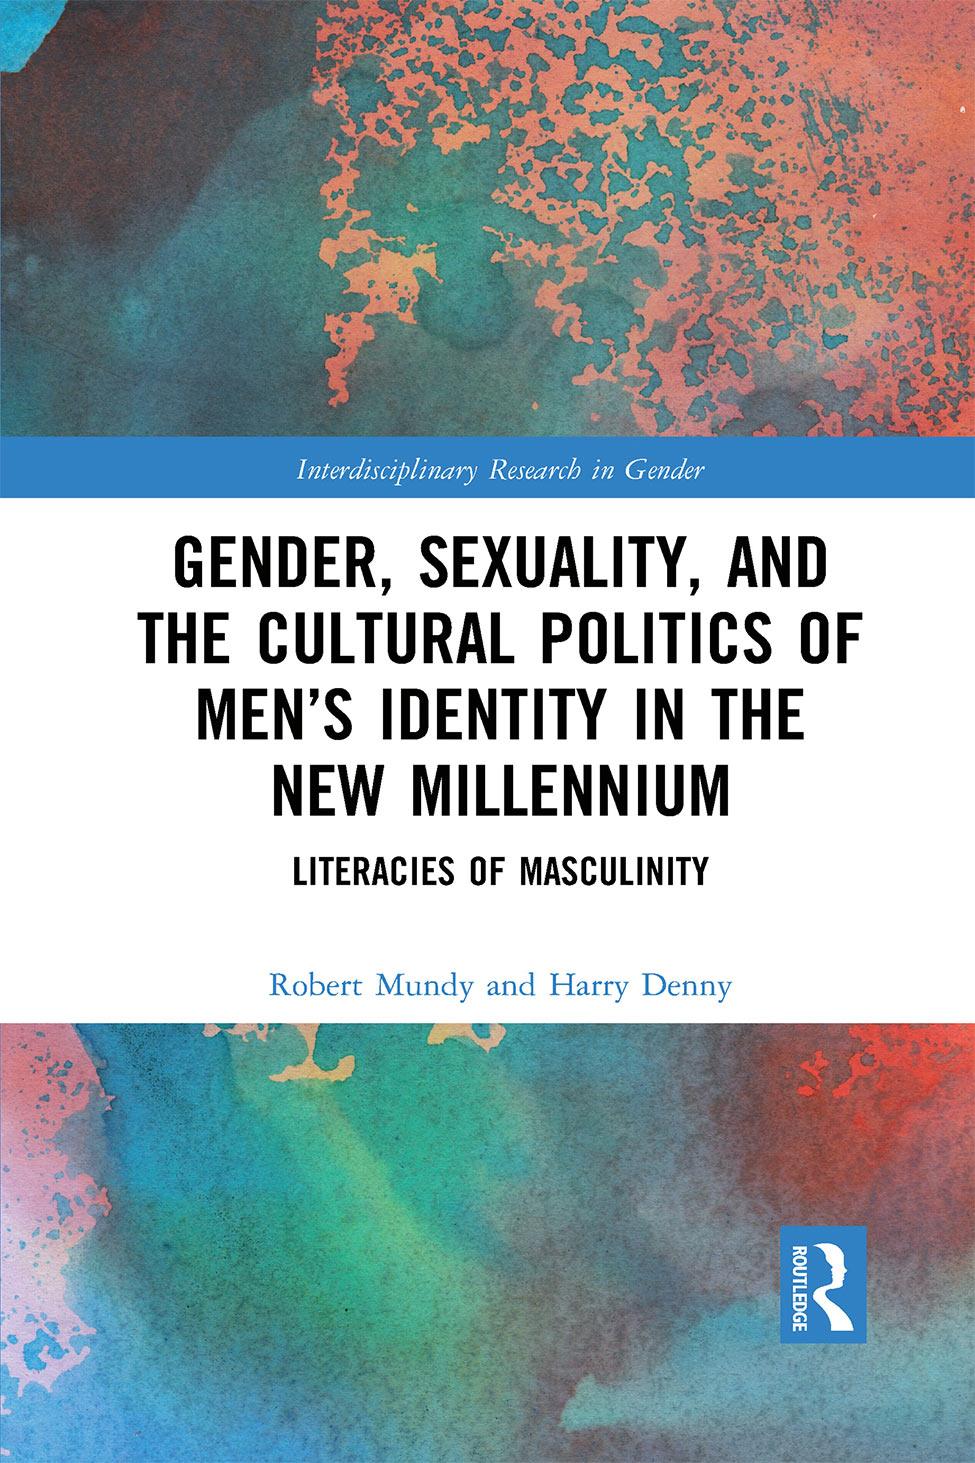 Gender, Sexuality, And The Cultural Politics Of Men’s Identity: Literacies Of Masculinity by Robert Mundy